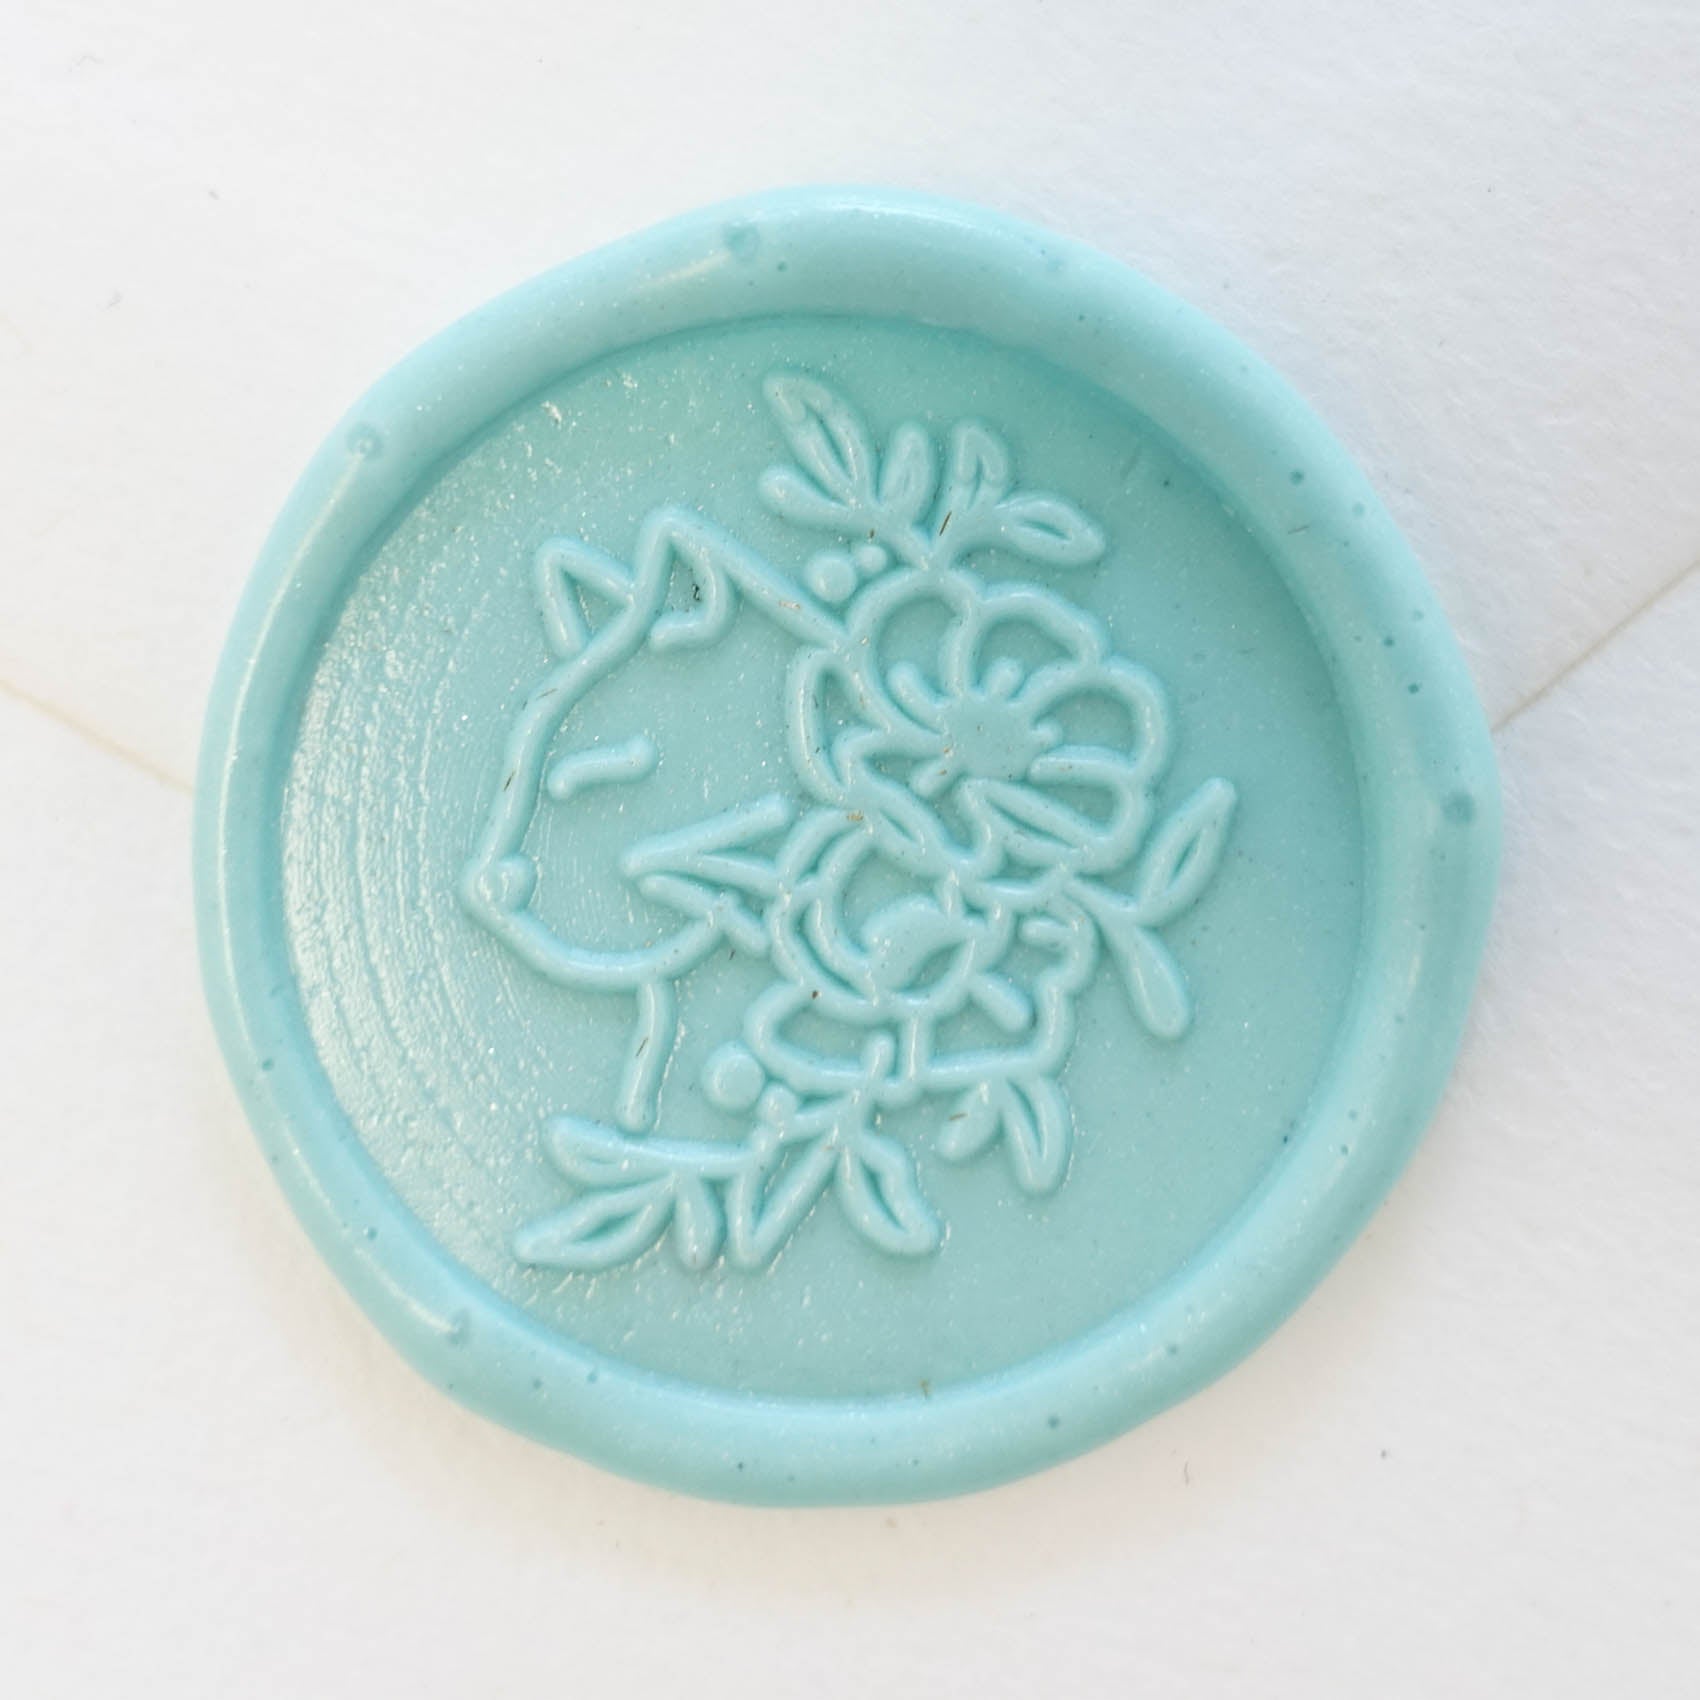 [PRE-ORDER] Floral Cat Portrait wax seal stamp, wax seal kit or stamp head